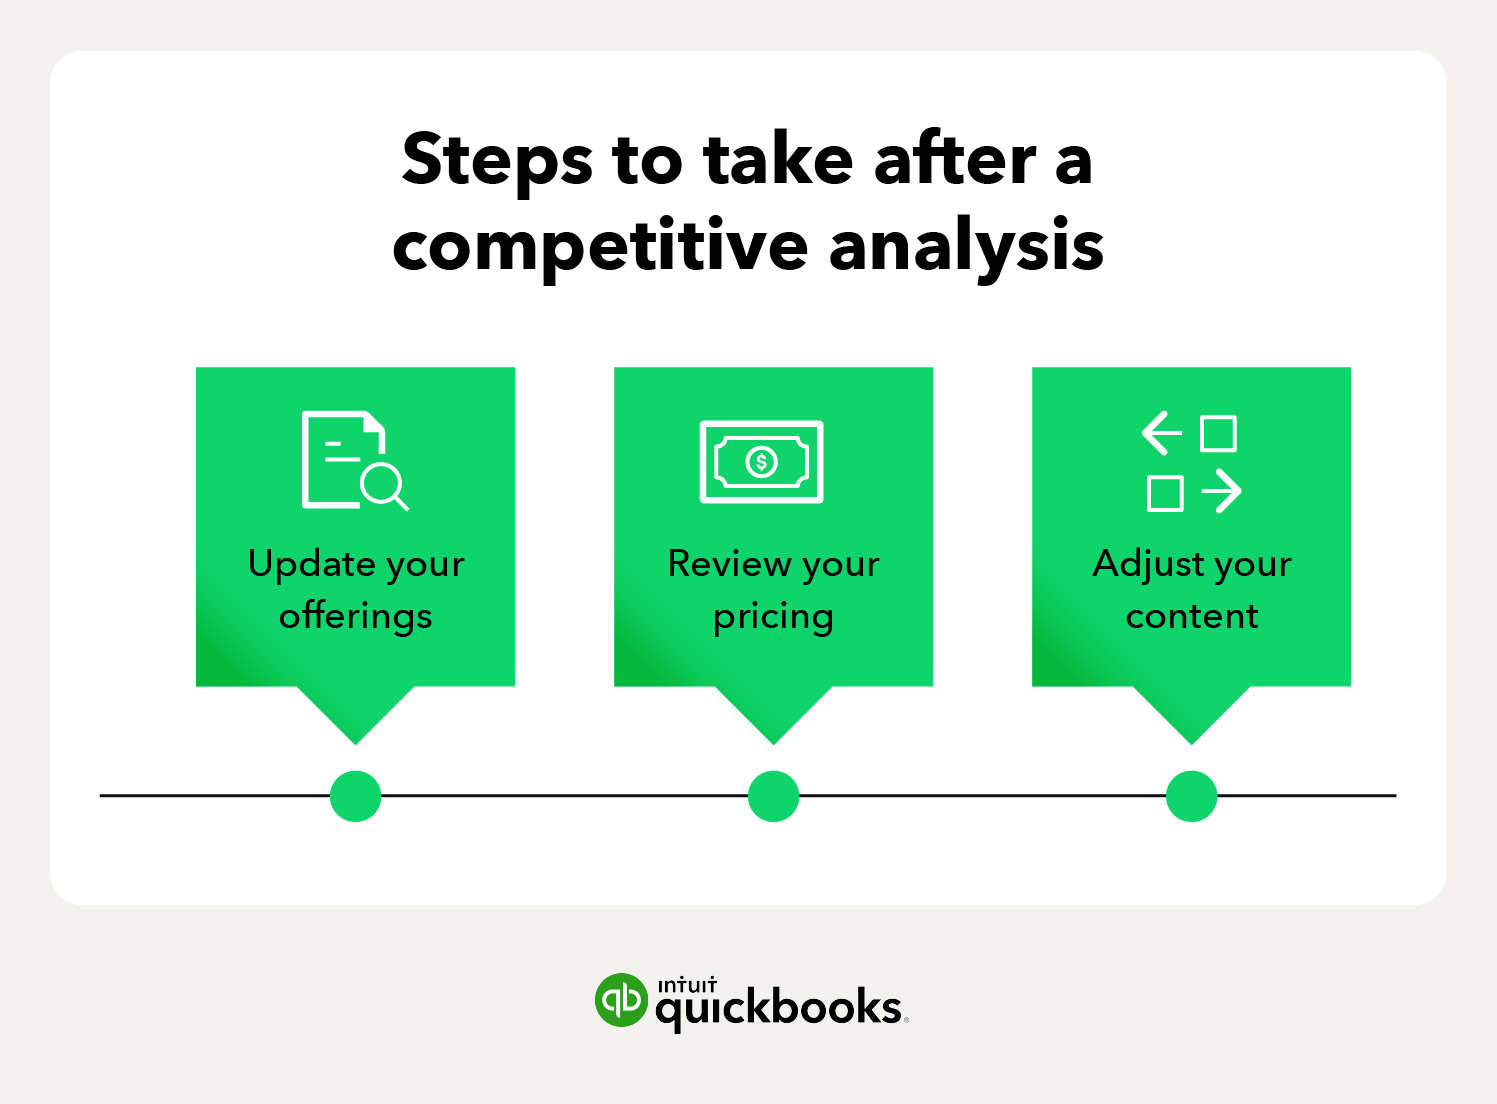 Image showing steps to take after completing a competitive analysis